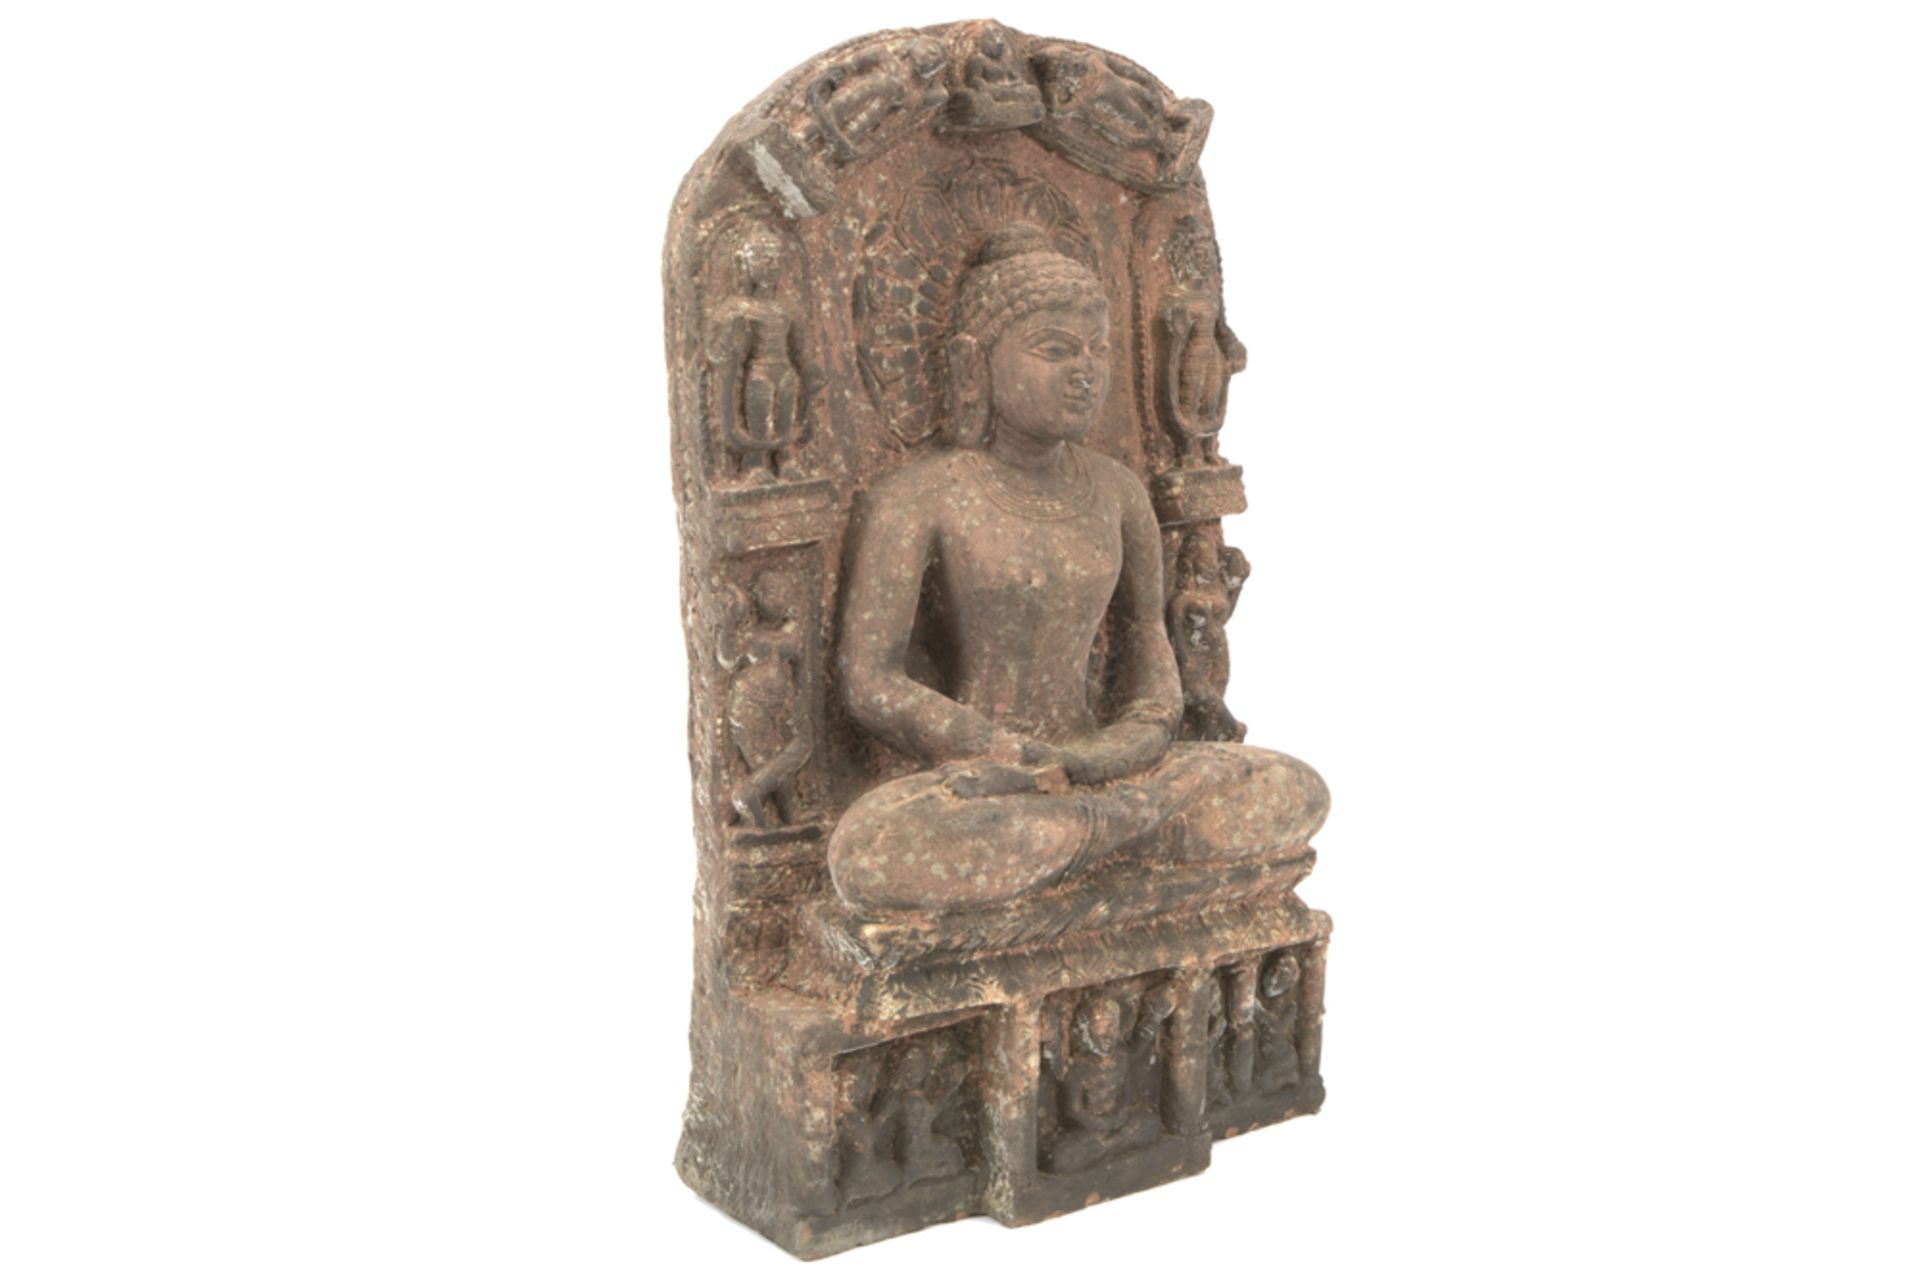 11th/12th Cent. Indian Gujarat sculpture in red sandstone representing "Buddha Sakyamuni" (in - Image 2 of 4